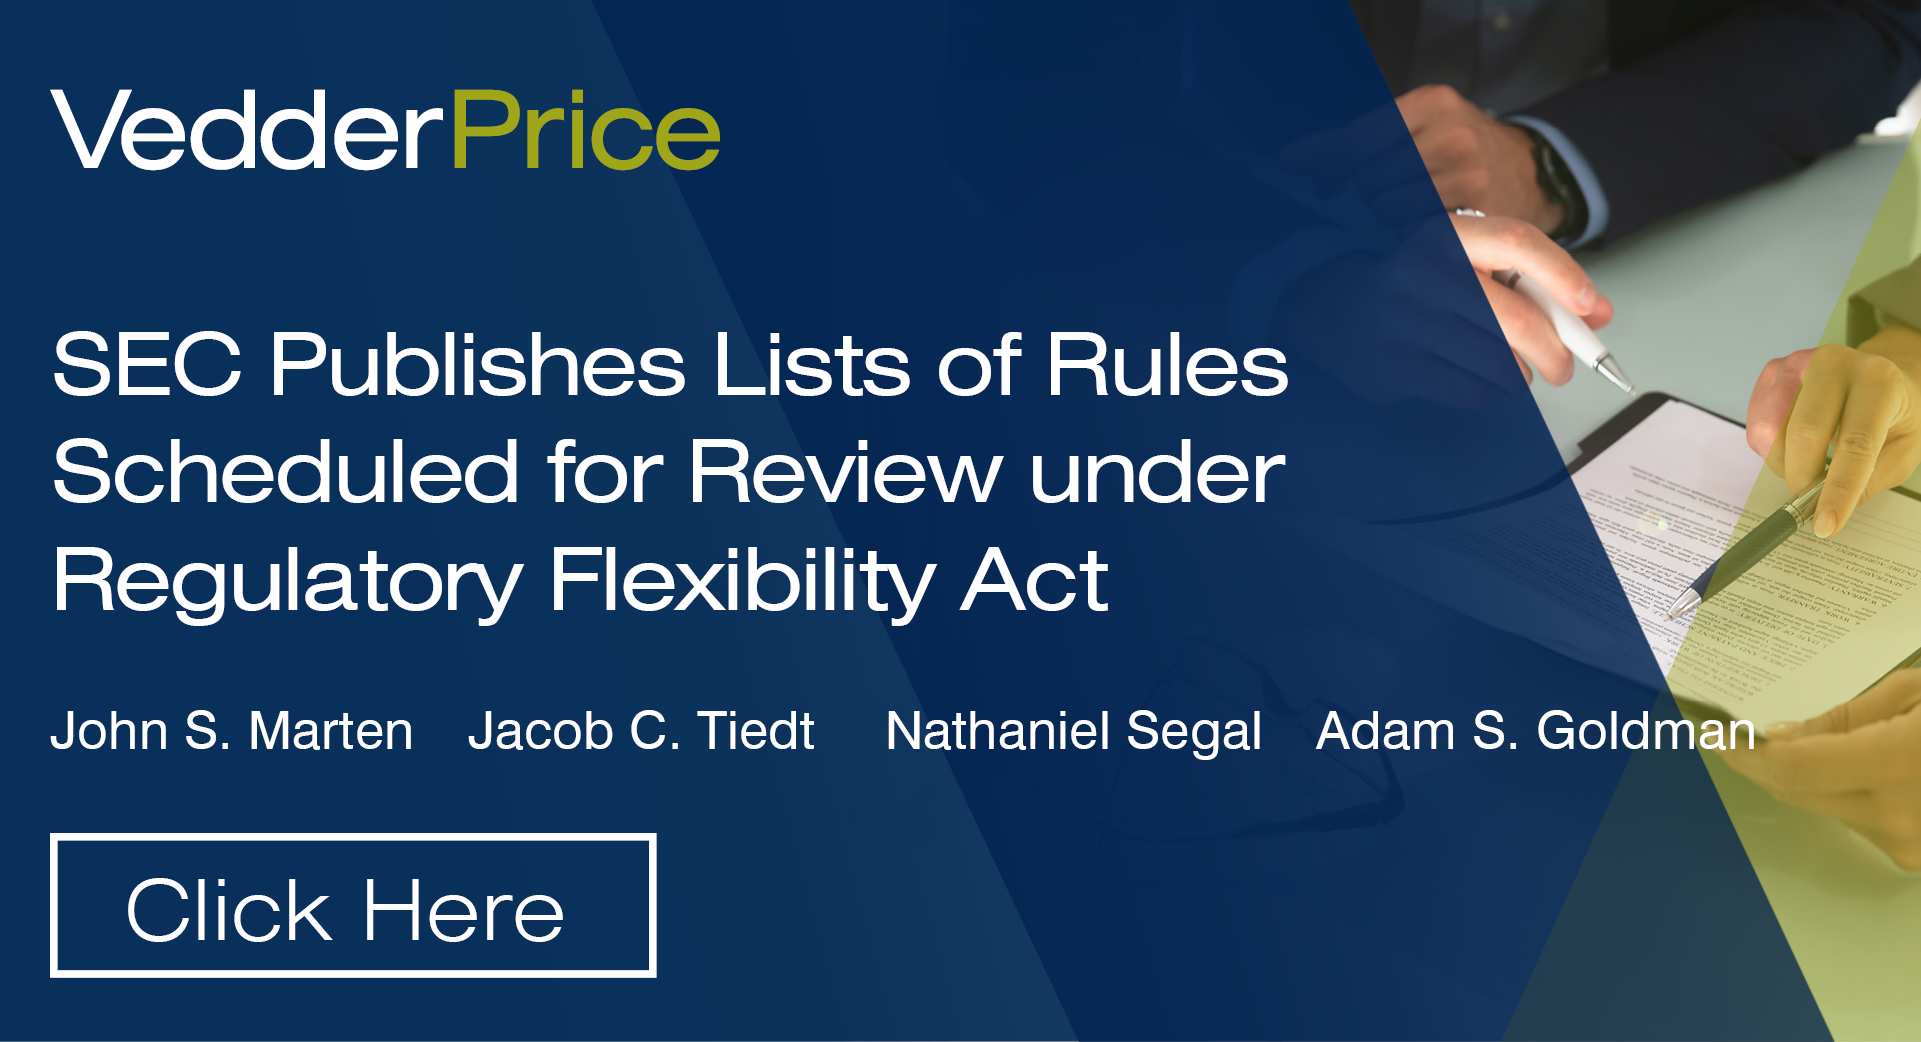 SEC Publishes Lists of Rules Scheduled for Review under Regulatory